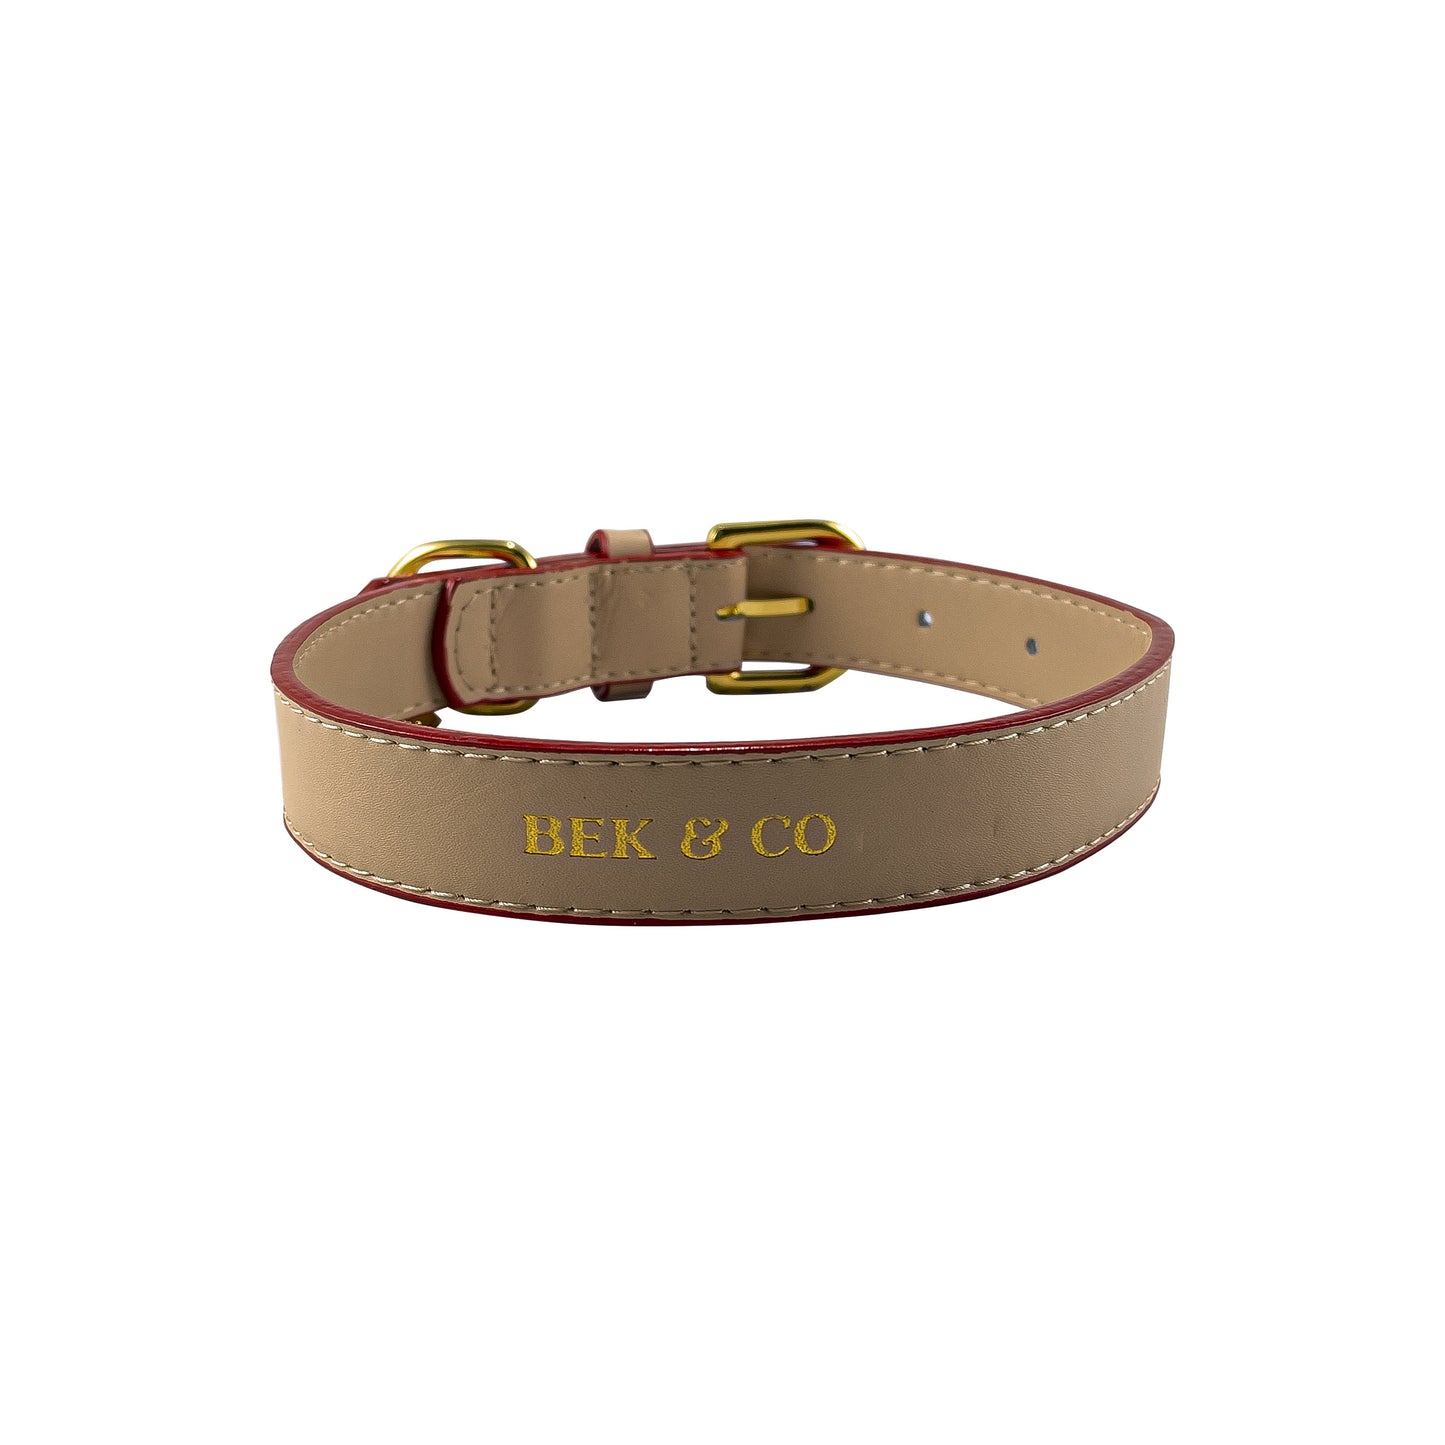 embossed logo on the Bek & Co Tan Leather French Bulldog collar